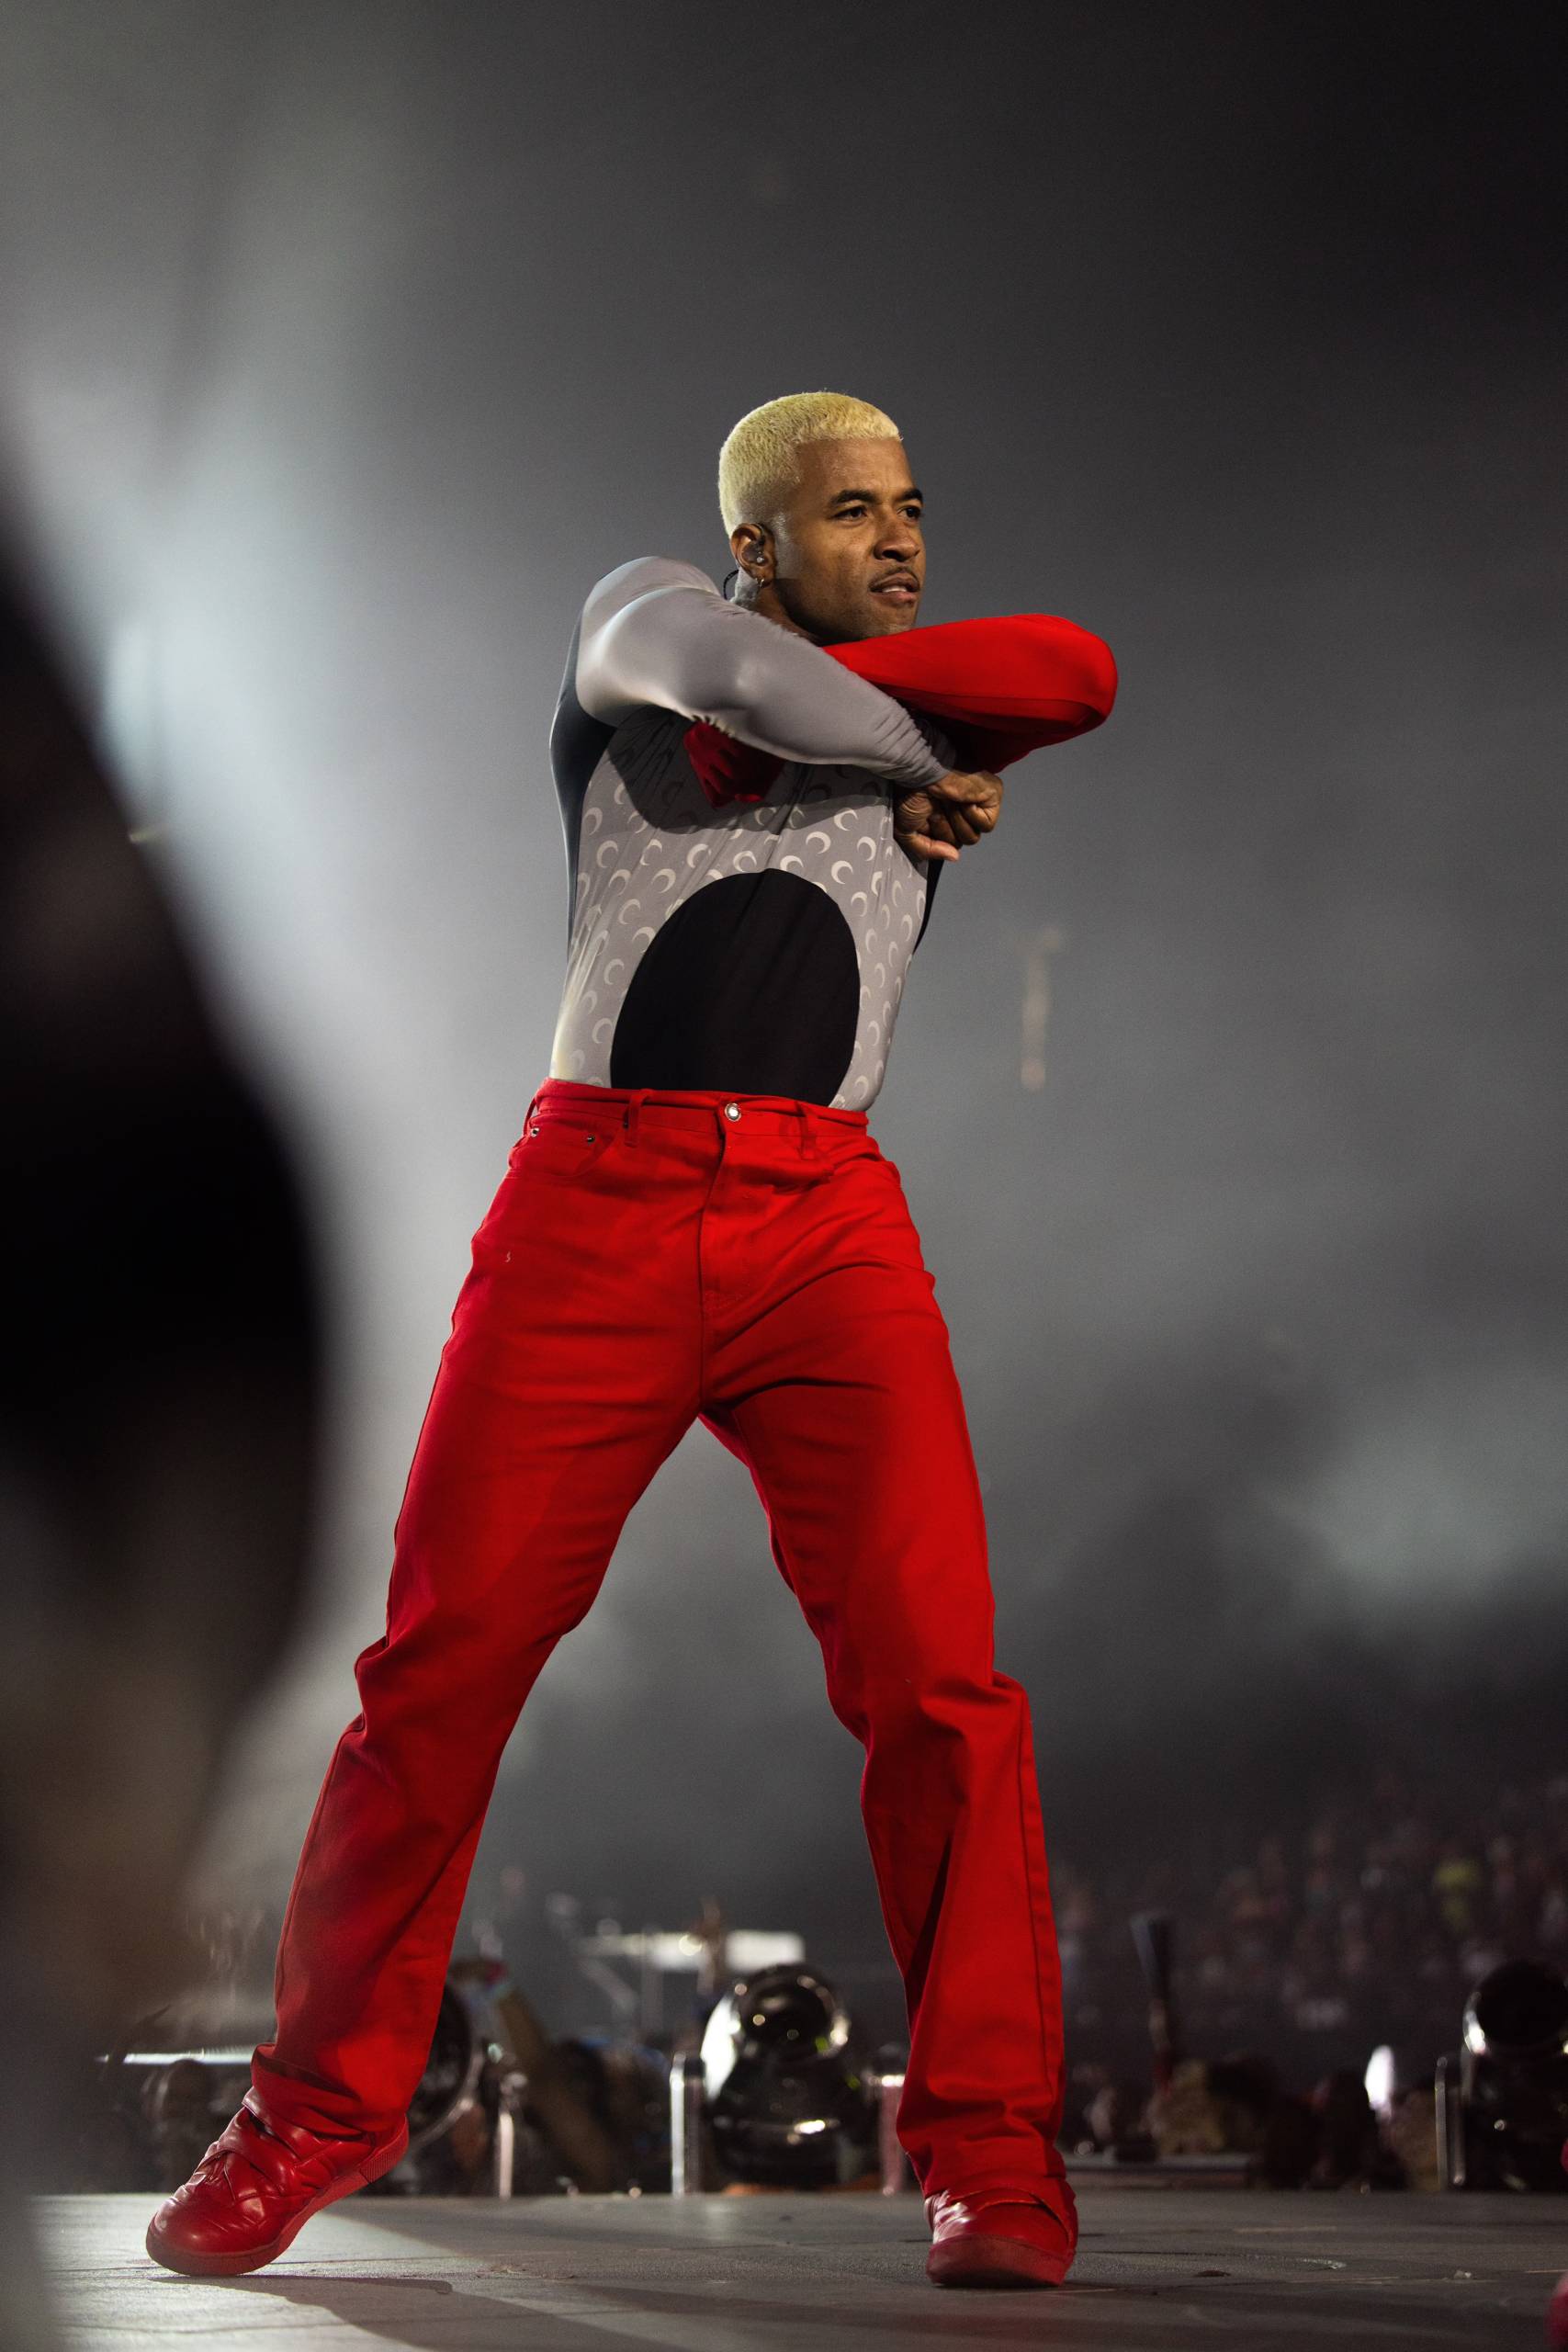 A dancer with bleached hair folds his arms o0n stage while wearing a silver top and red pants.